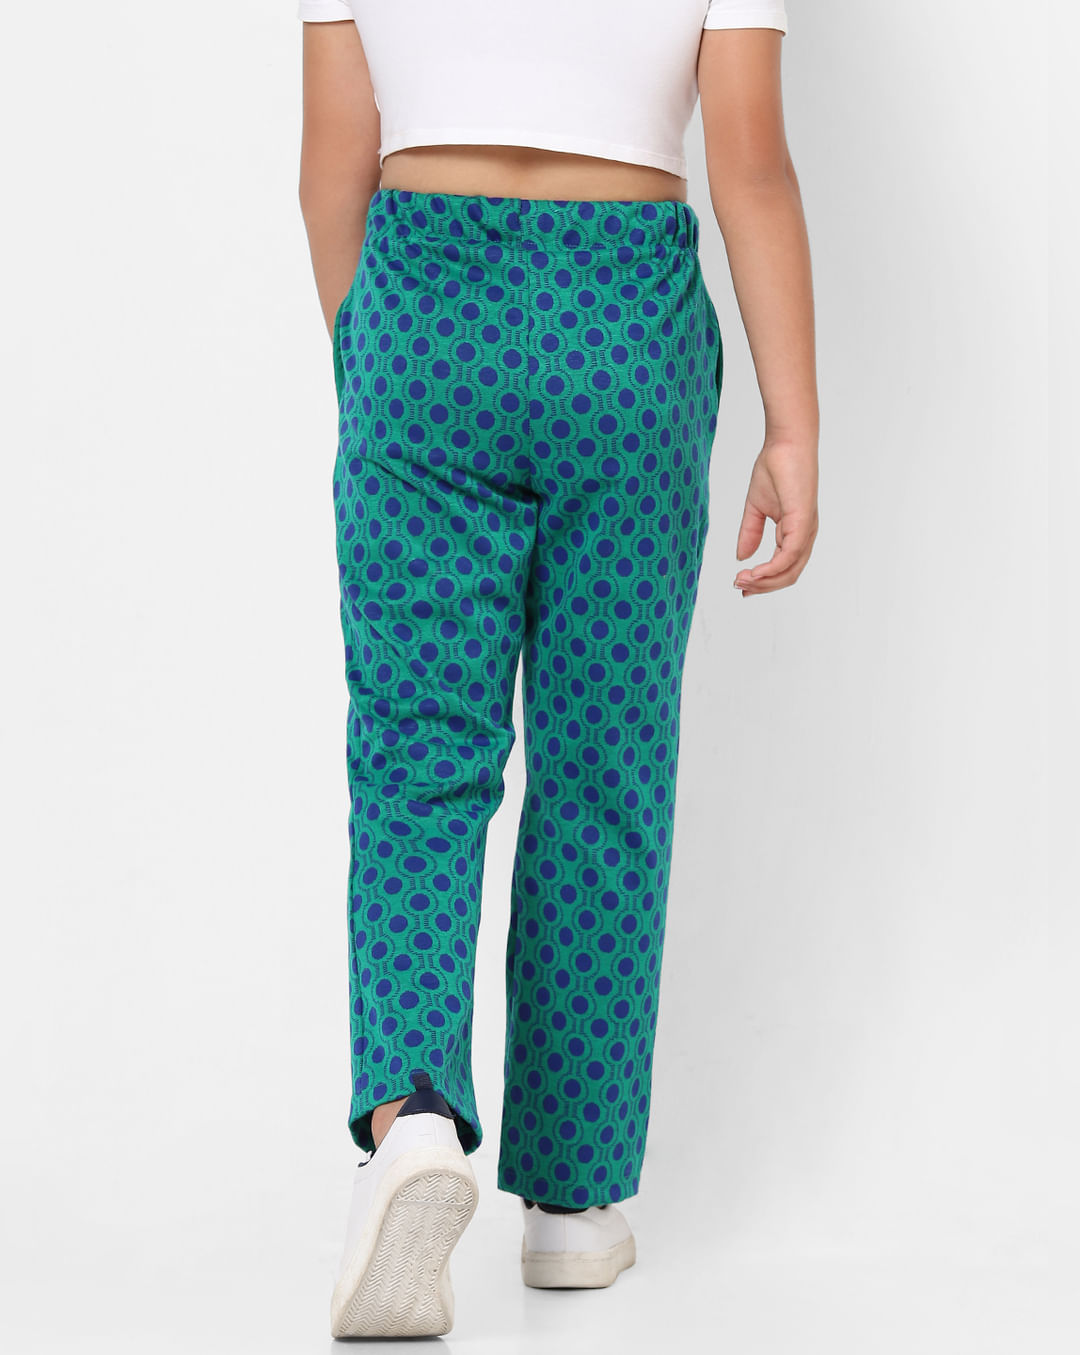 Buy Green Mid Rise Printed Wide Leg Pants for Girls Online at KidsOnly